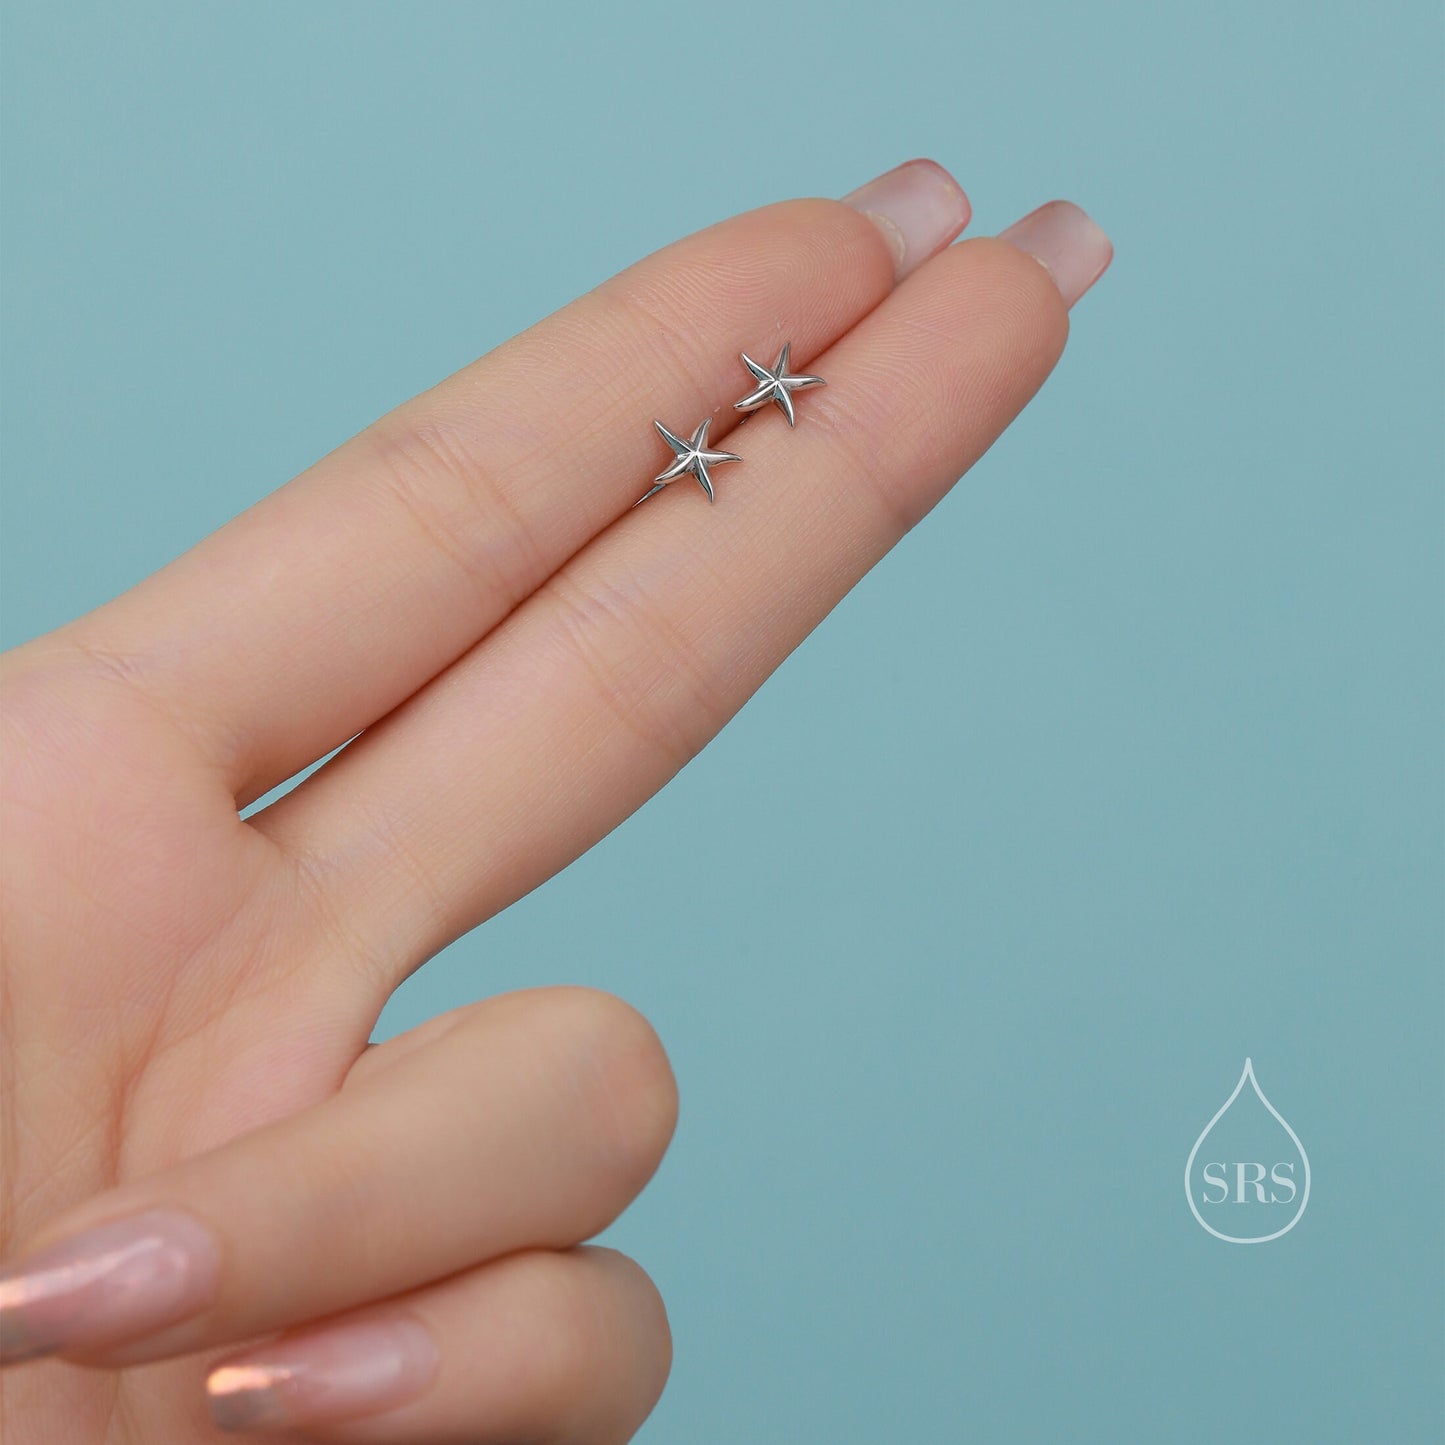 Tiny Starfish Stud Earrings in Sterling Silver, Silver, Gold or Rose Gold, Small Starfish Earrings, Star Fish Earrings, Sea Star Earrings